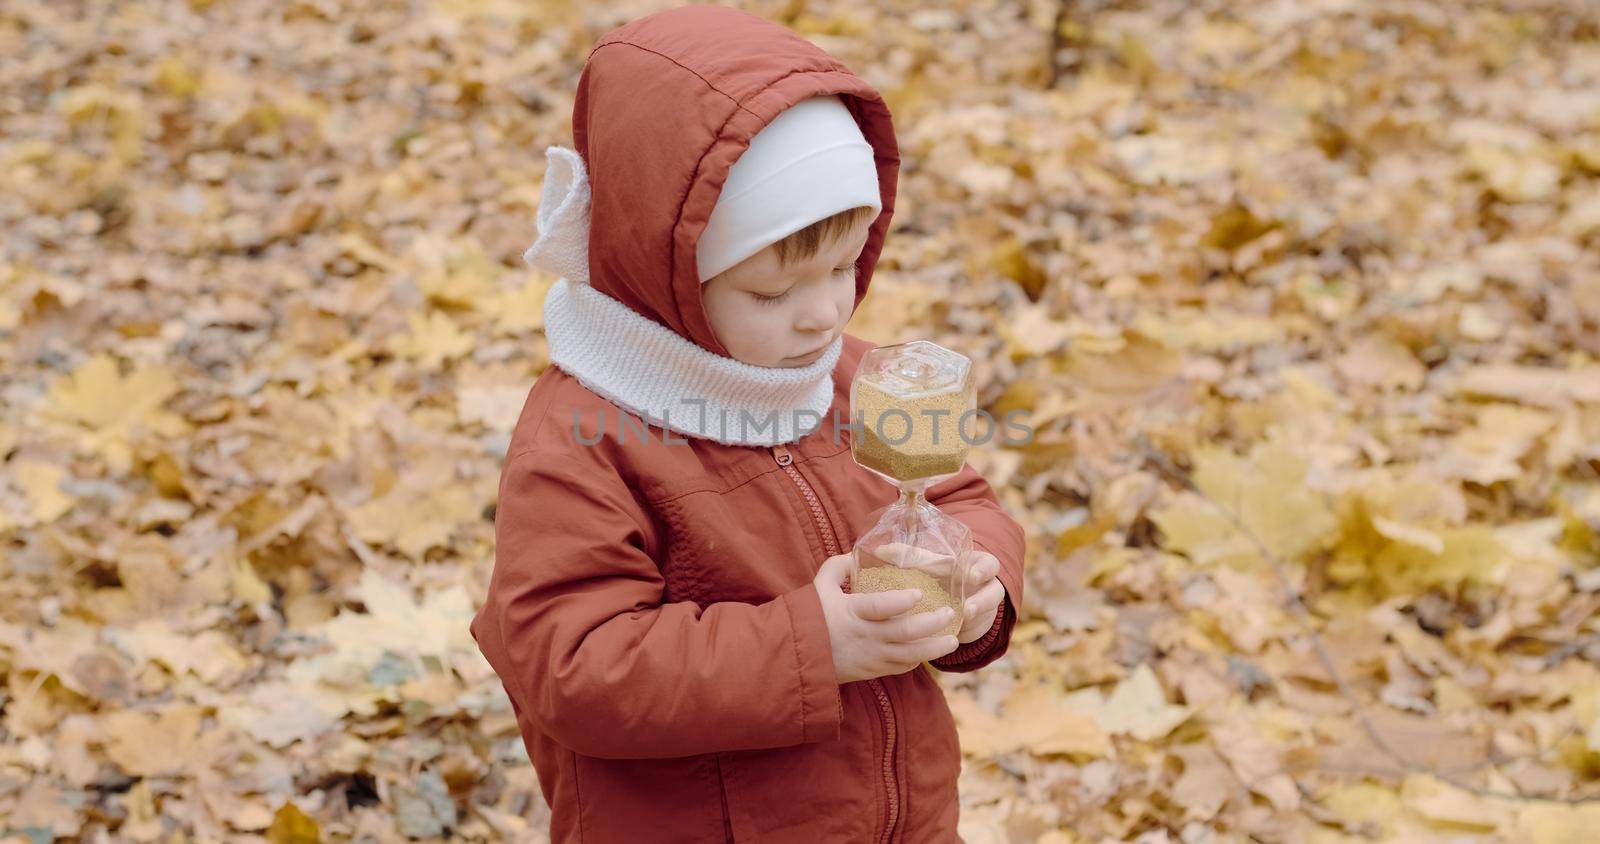 Little, a Caucasian girl is playing with a glass hourglass in the autumn forest. The concept of changing seasons, the transience of time and growing up